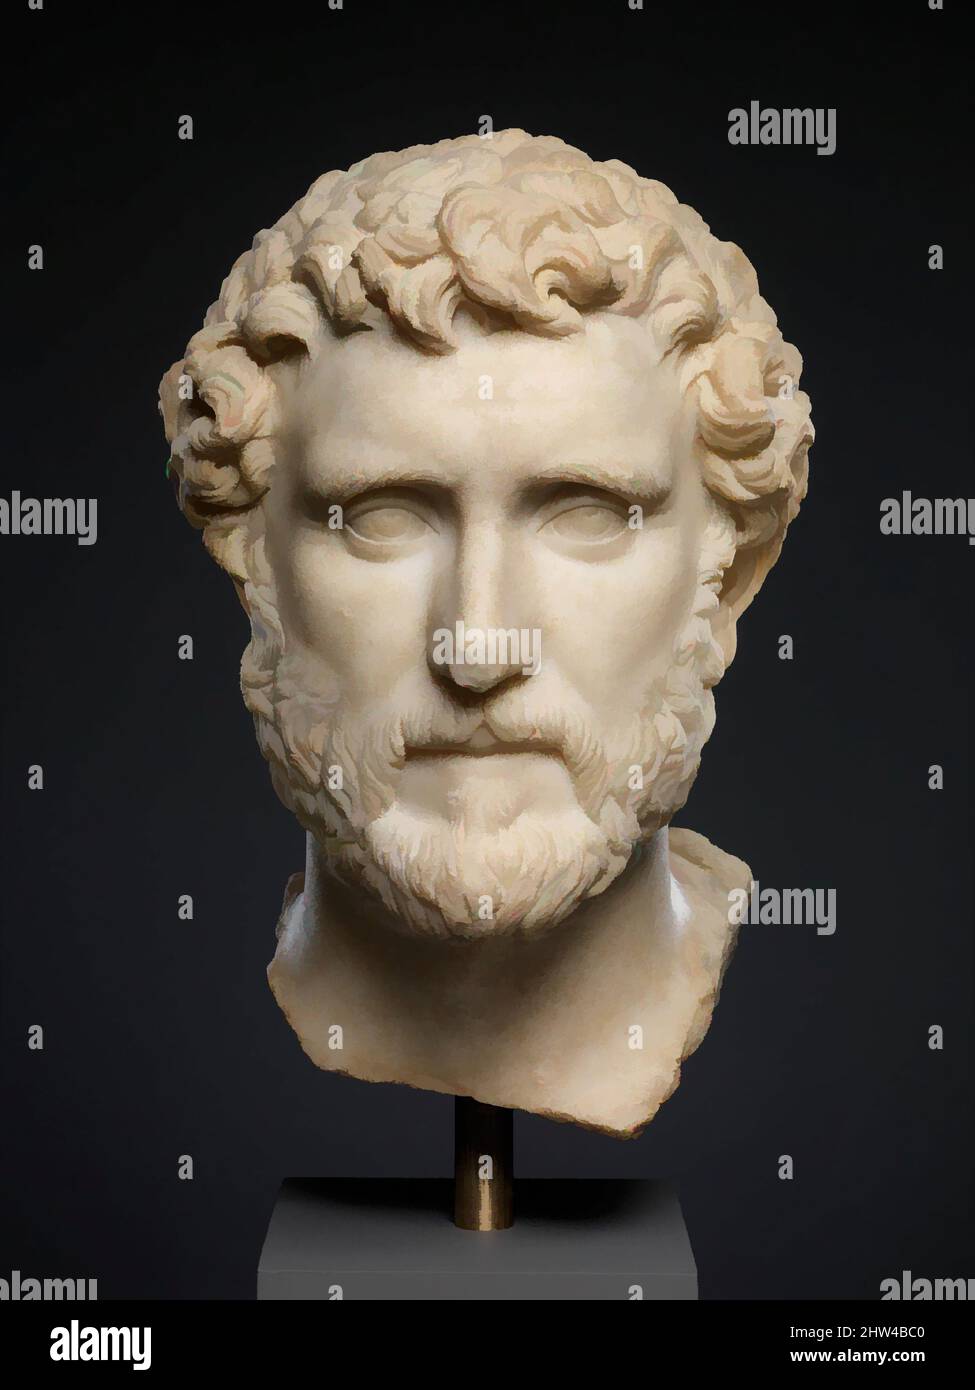 Art inspired by Marble portrait of the emperor Antoninus Pius, Antonine, ca. A.D. 138–161, Roman, Marble, H. 15 13/16 in. (40.2 cm), Stone Sculpture, Antoninus Pius was adopted by Hadrian as his successor when he was already fifty-one years old. His portraits thus represent him as a, Classic works modernized by Artotop with a splash of modernity. Shapes, color and value, eye-catching visual impact on art. Emotions through freedom of artworks in a contemporary way. A timeless message pursuing a wildly creative new direction. Artists turning to the digital medium and creating the Artotop NFT Stock Photo